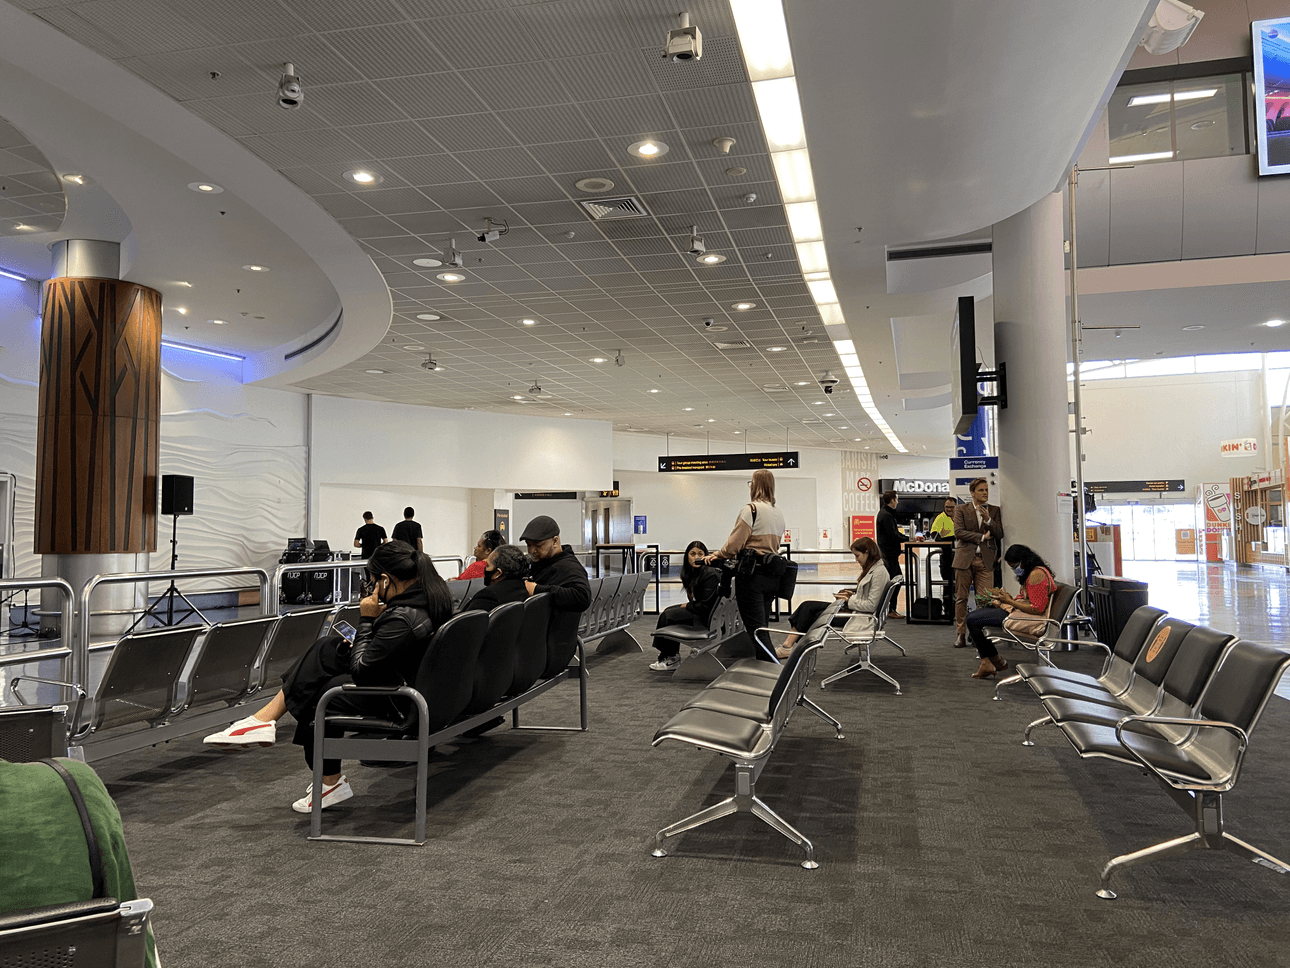 Crowd at Auckland Airport grows